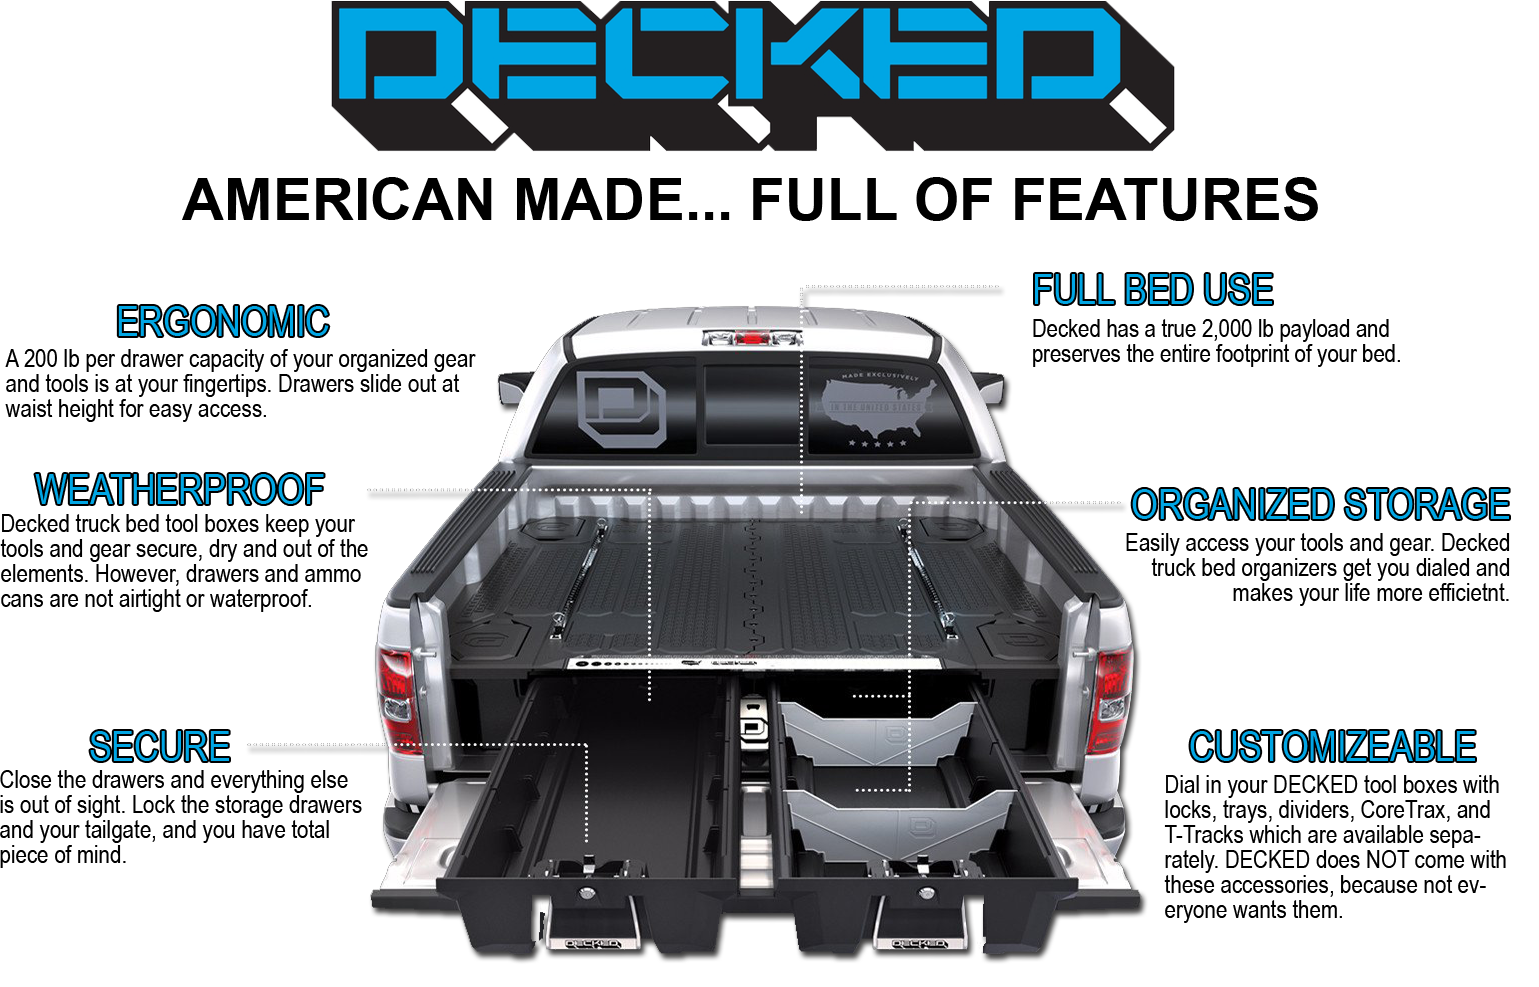 Decked features